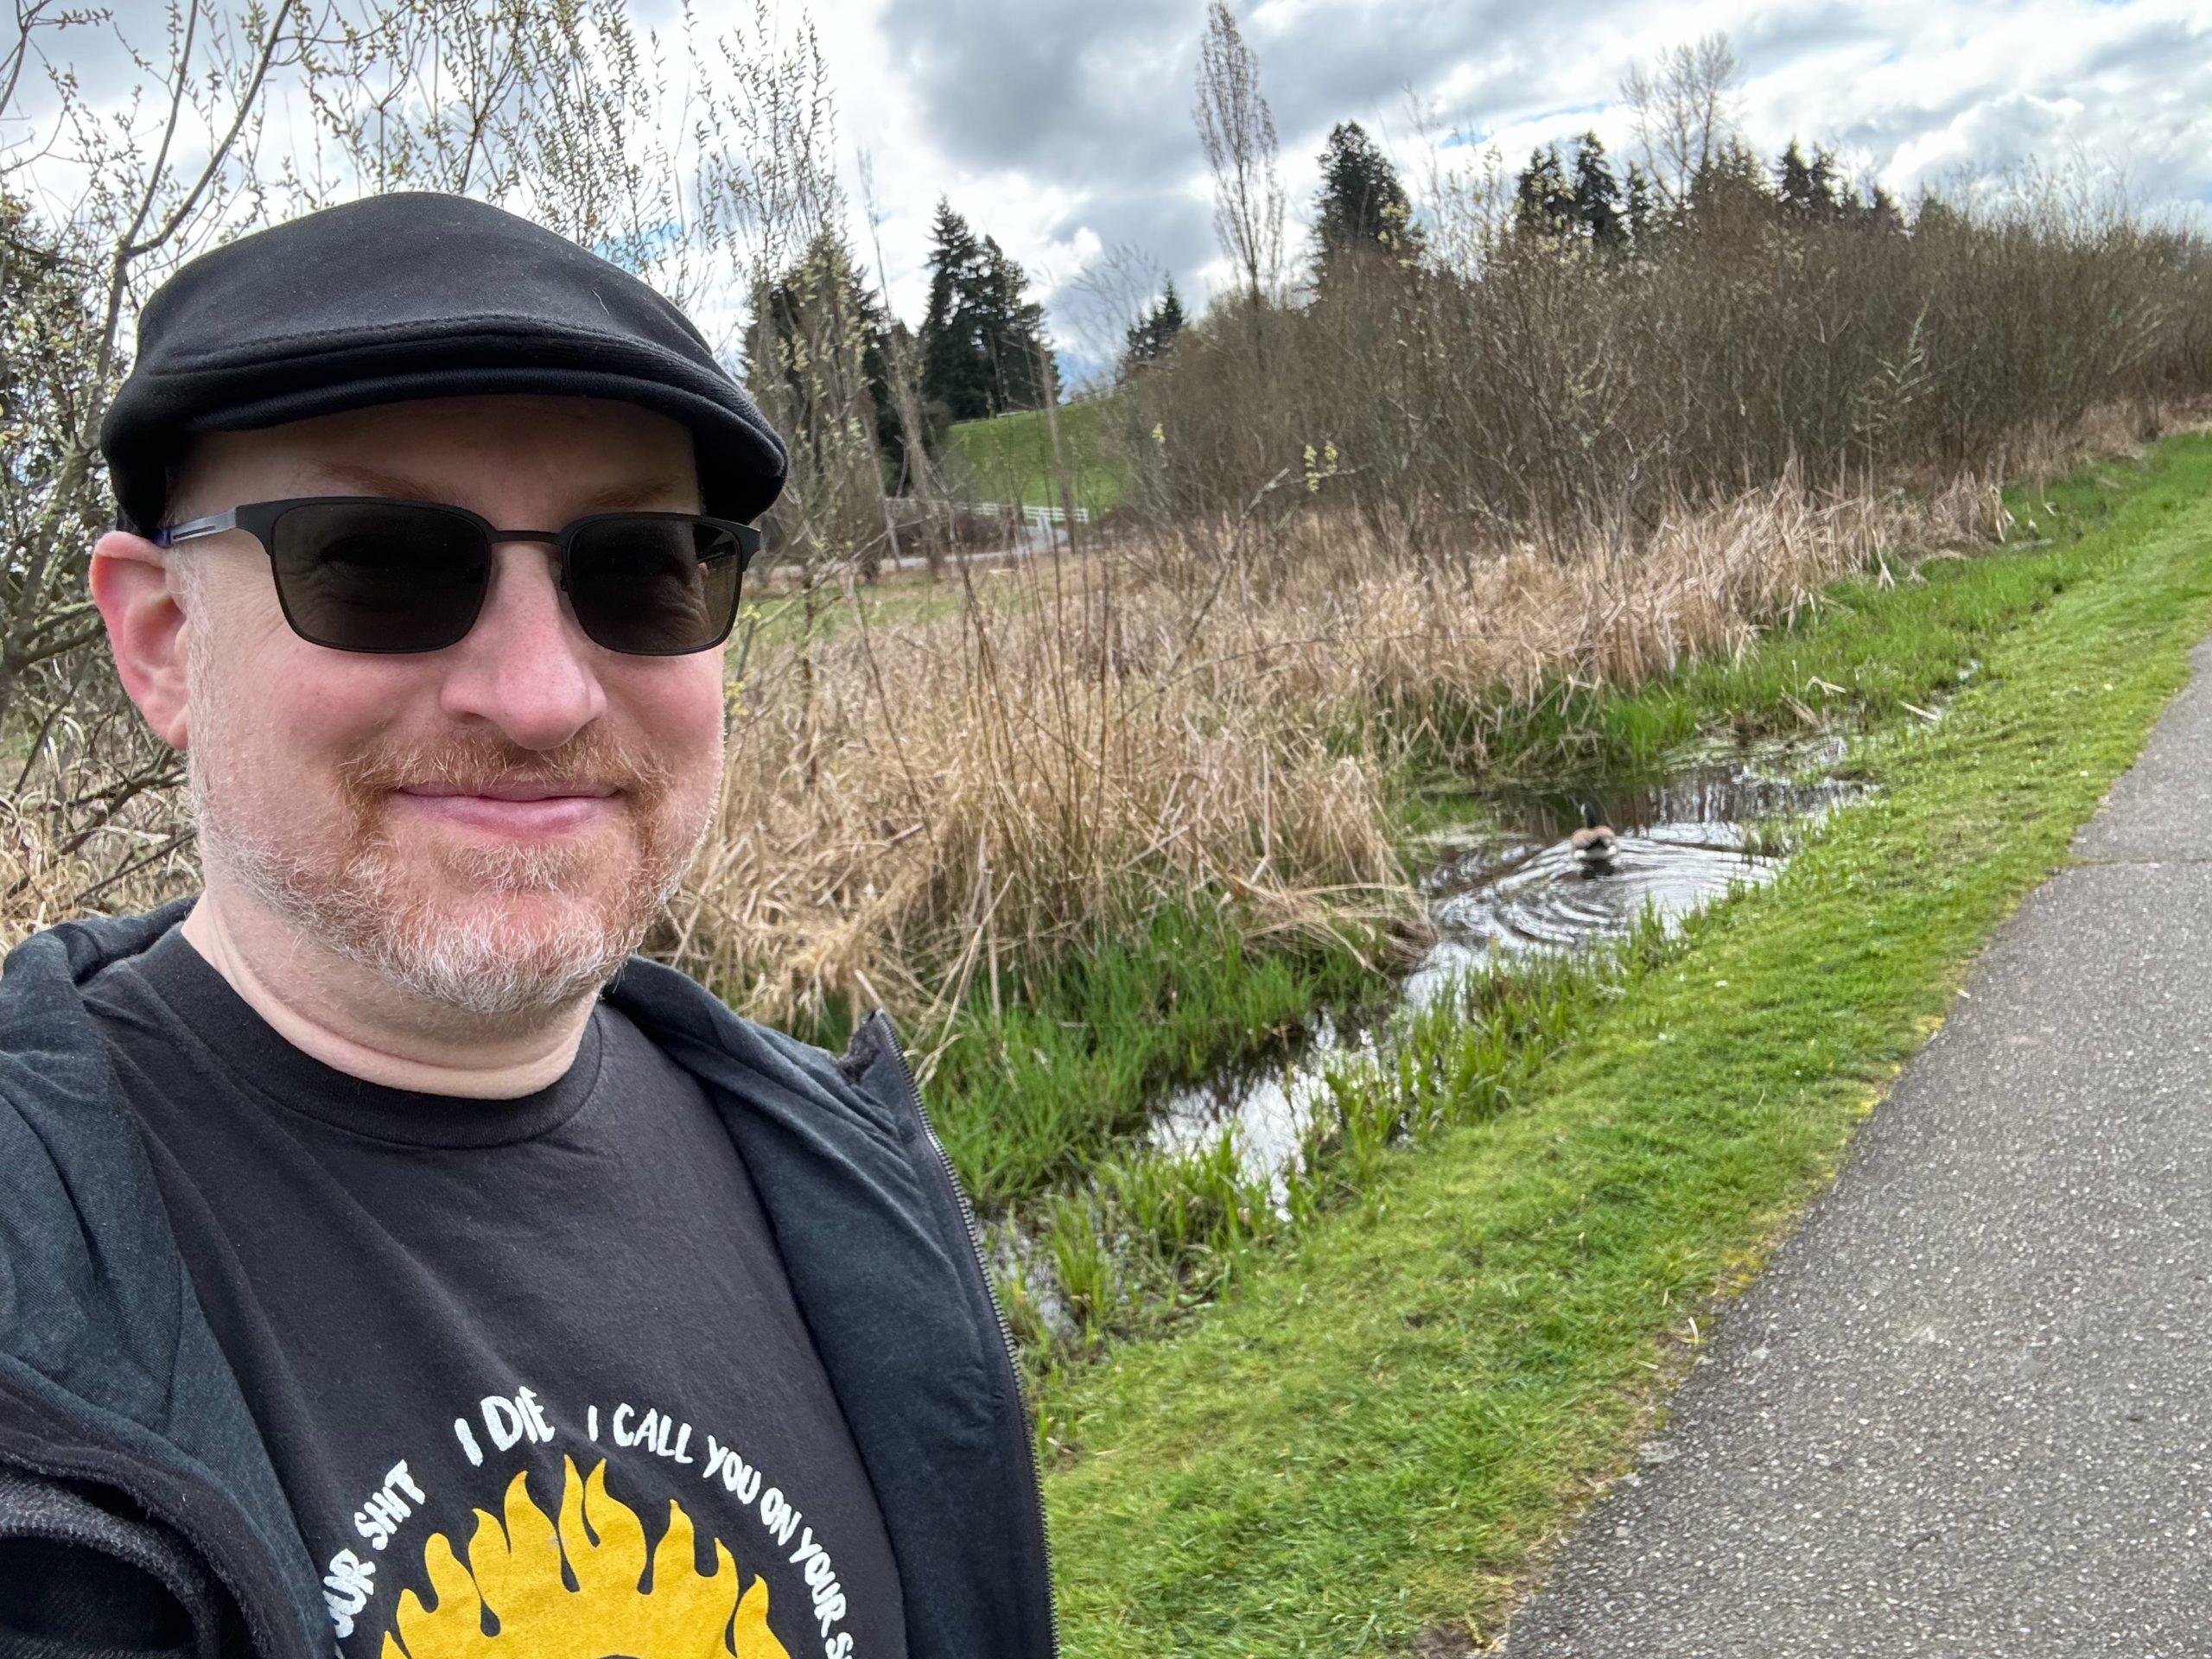 Me on a path next to marshland, with a Canadian Goose visible in a pond just behind me.